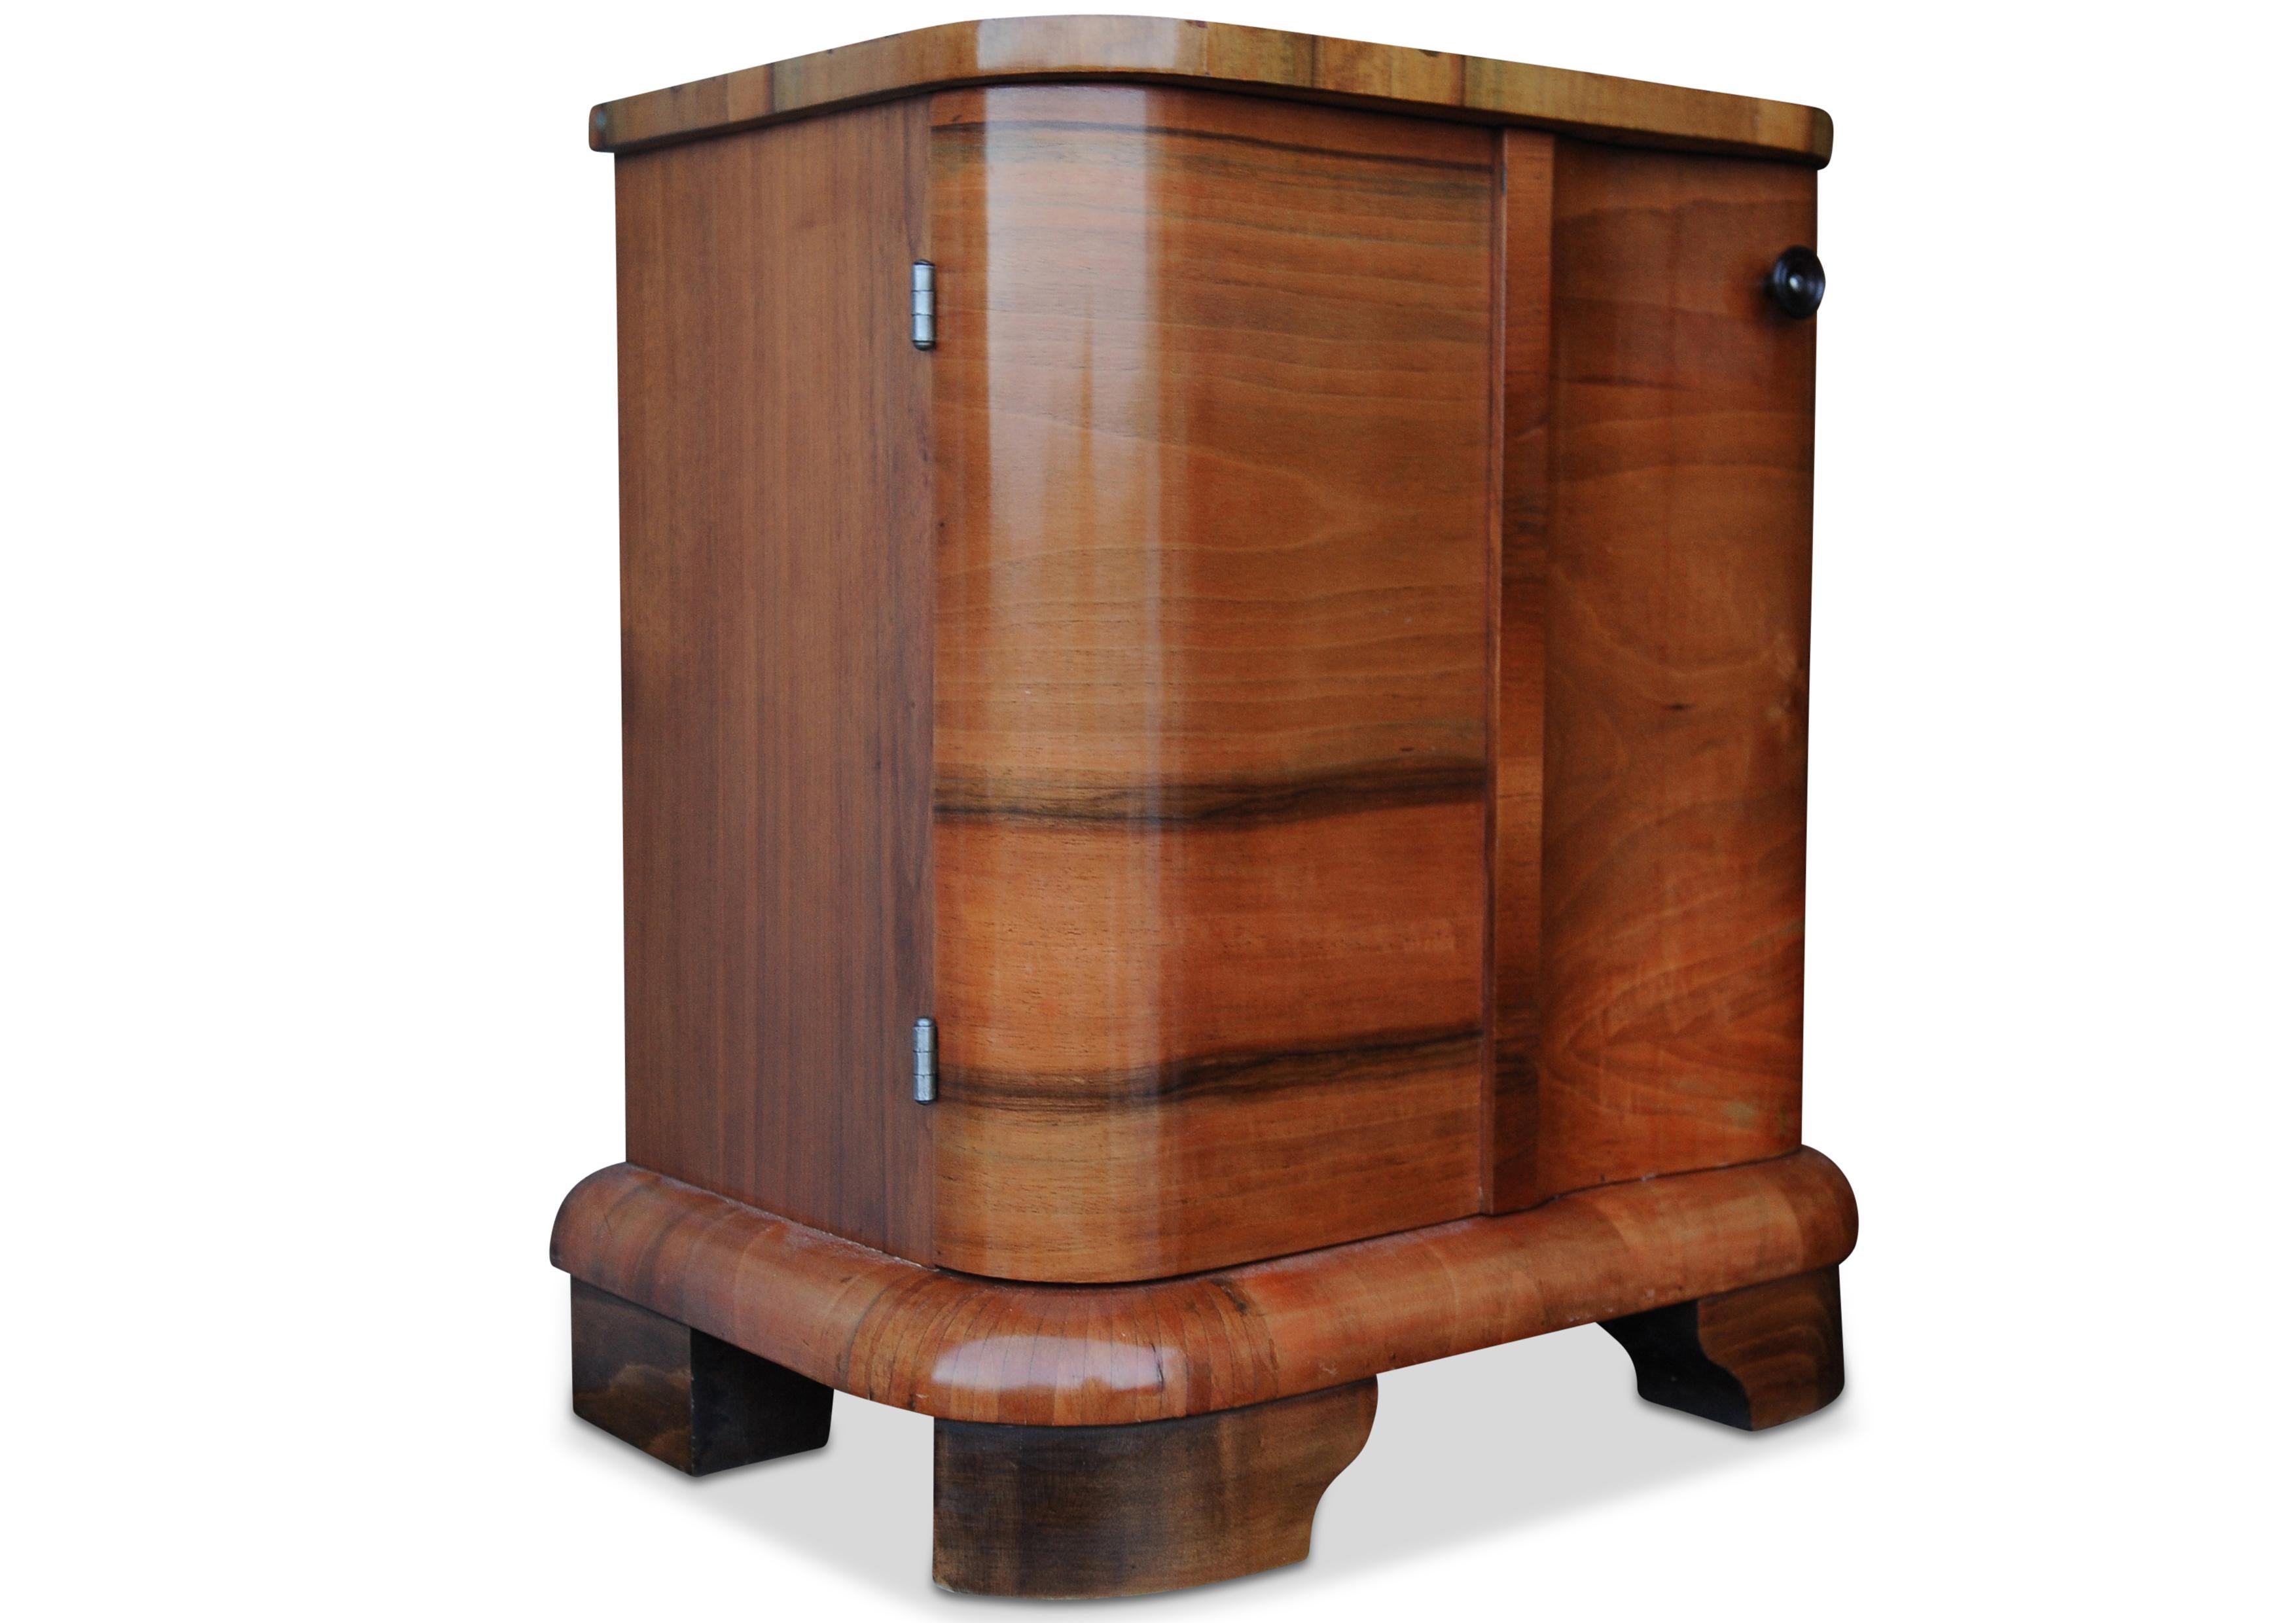 A Pair Of French Art Deco Bedside Cabinets Exquisite Walnut Cloud Shaped Cabinets with Inner Shelf 1920s

.